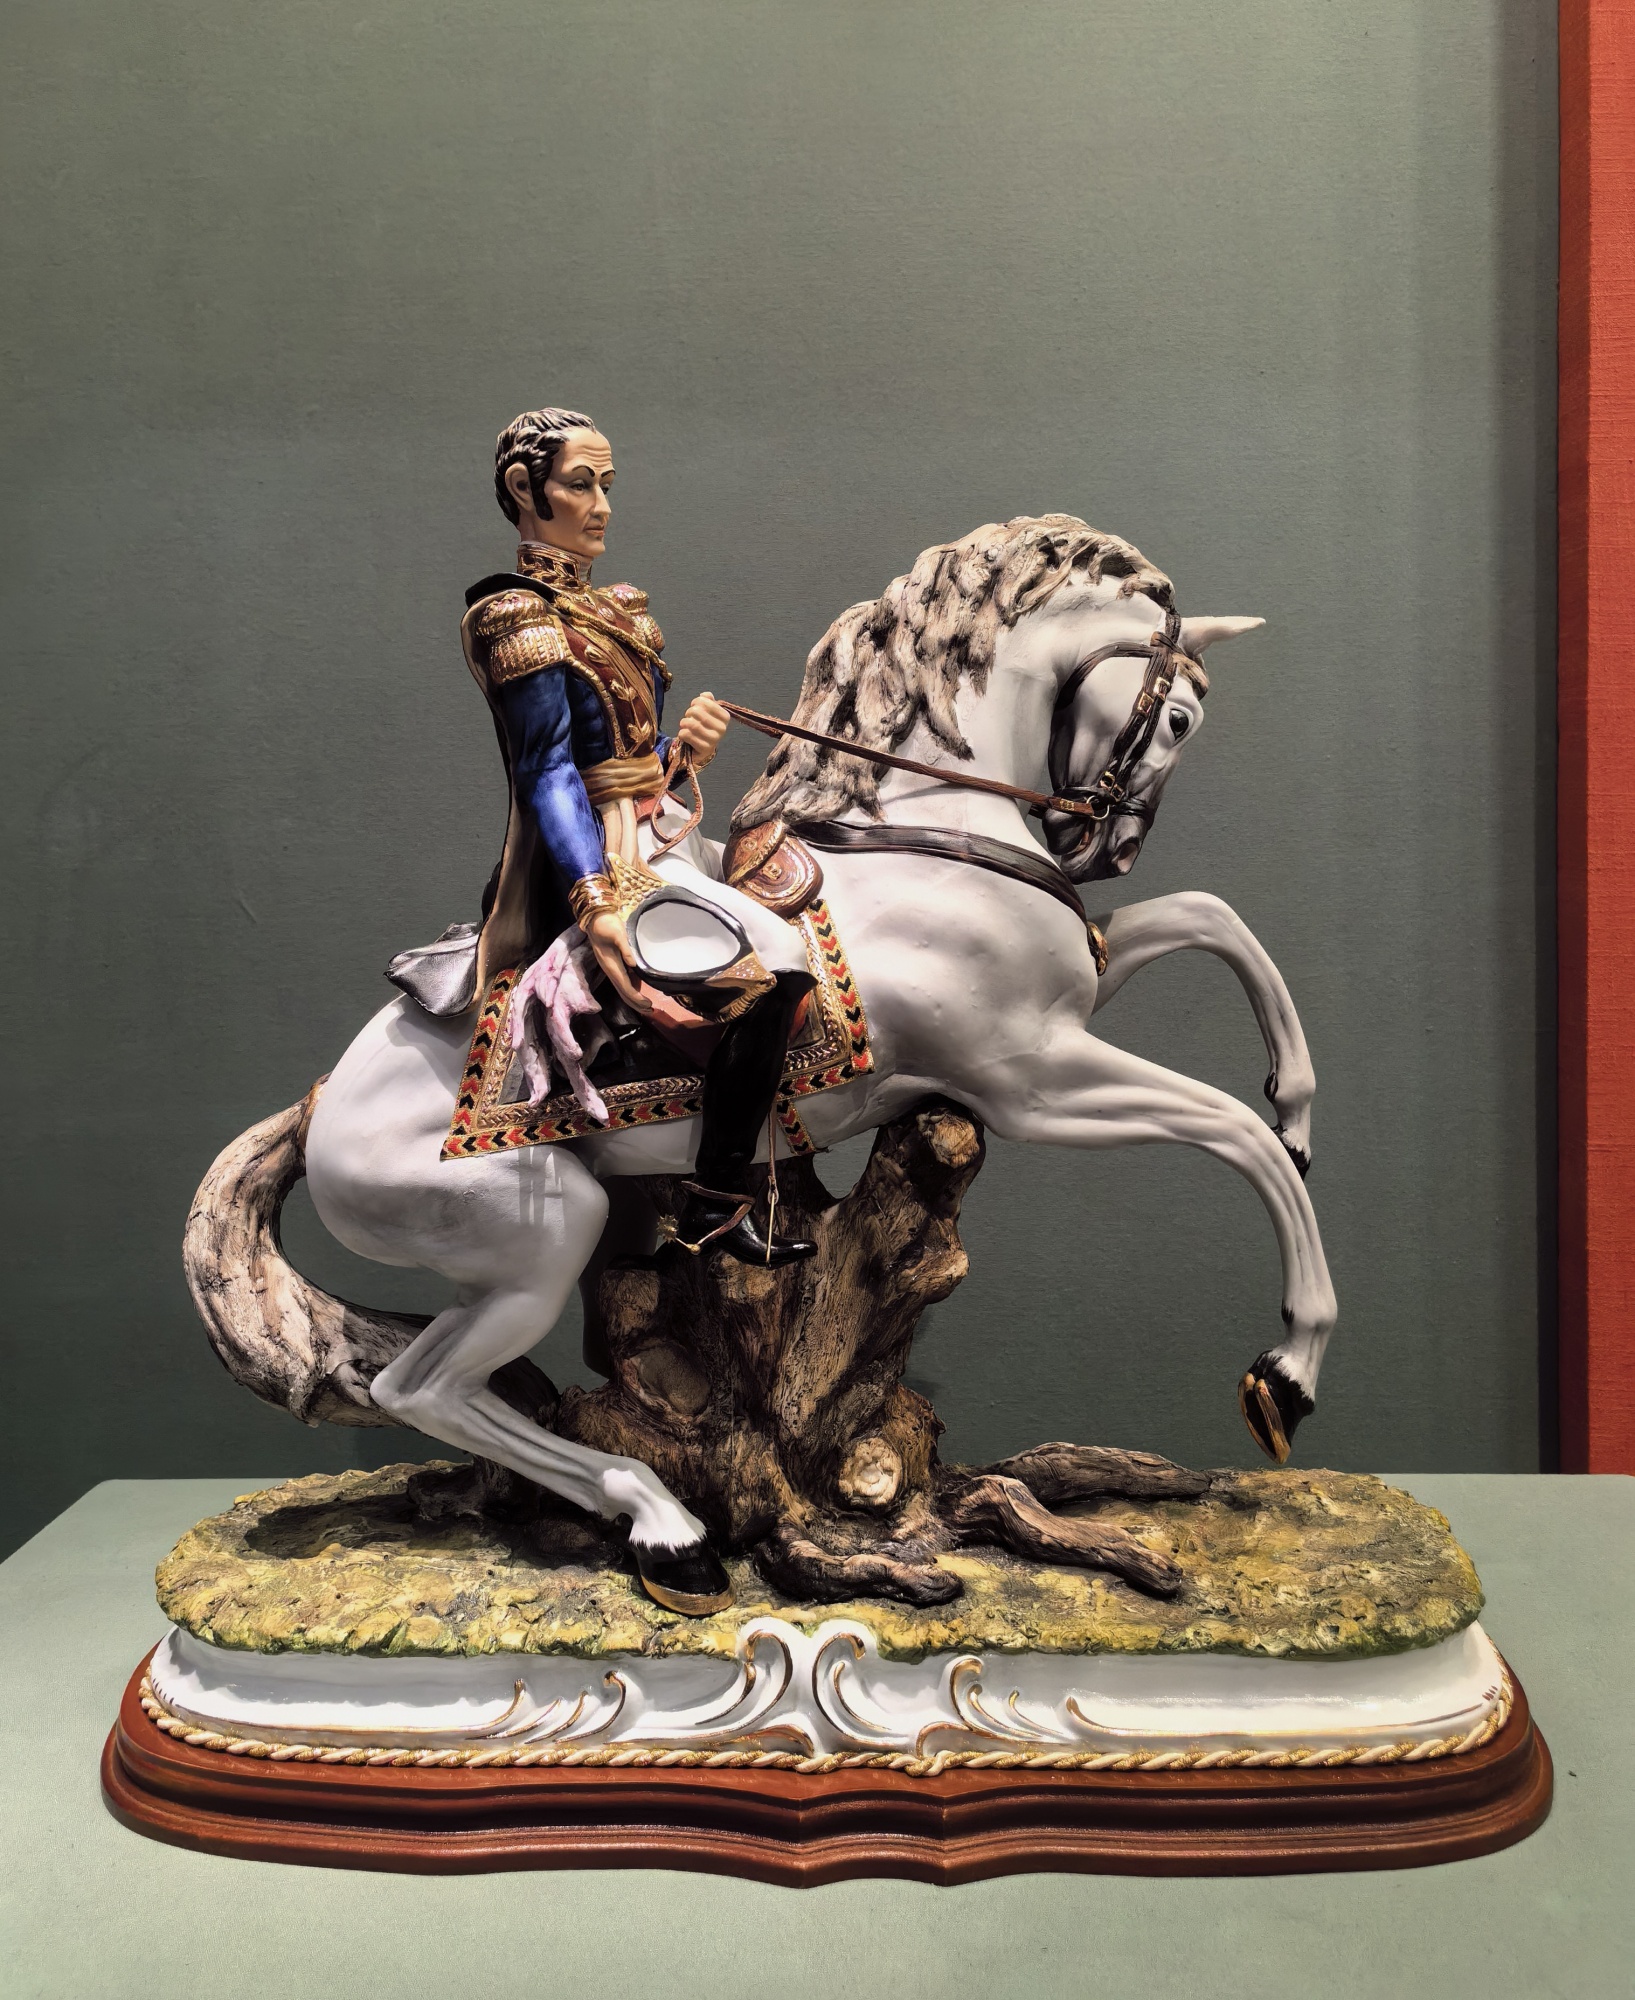 A porcelain statue of Simon Bolivar gifted by former President Hugo Rafael Chavez Frias of Venezuela in 2001 is on display at the Central Gifts and Cultural Relics Management Center in Beijing, on May 23, 2024. /CGTN